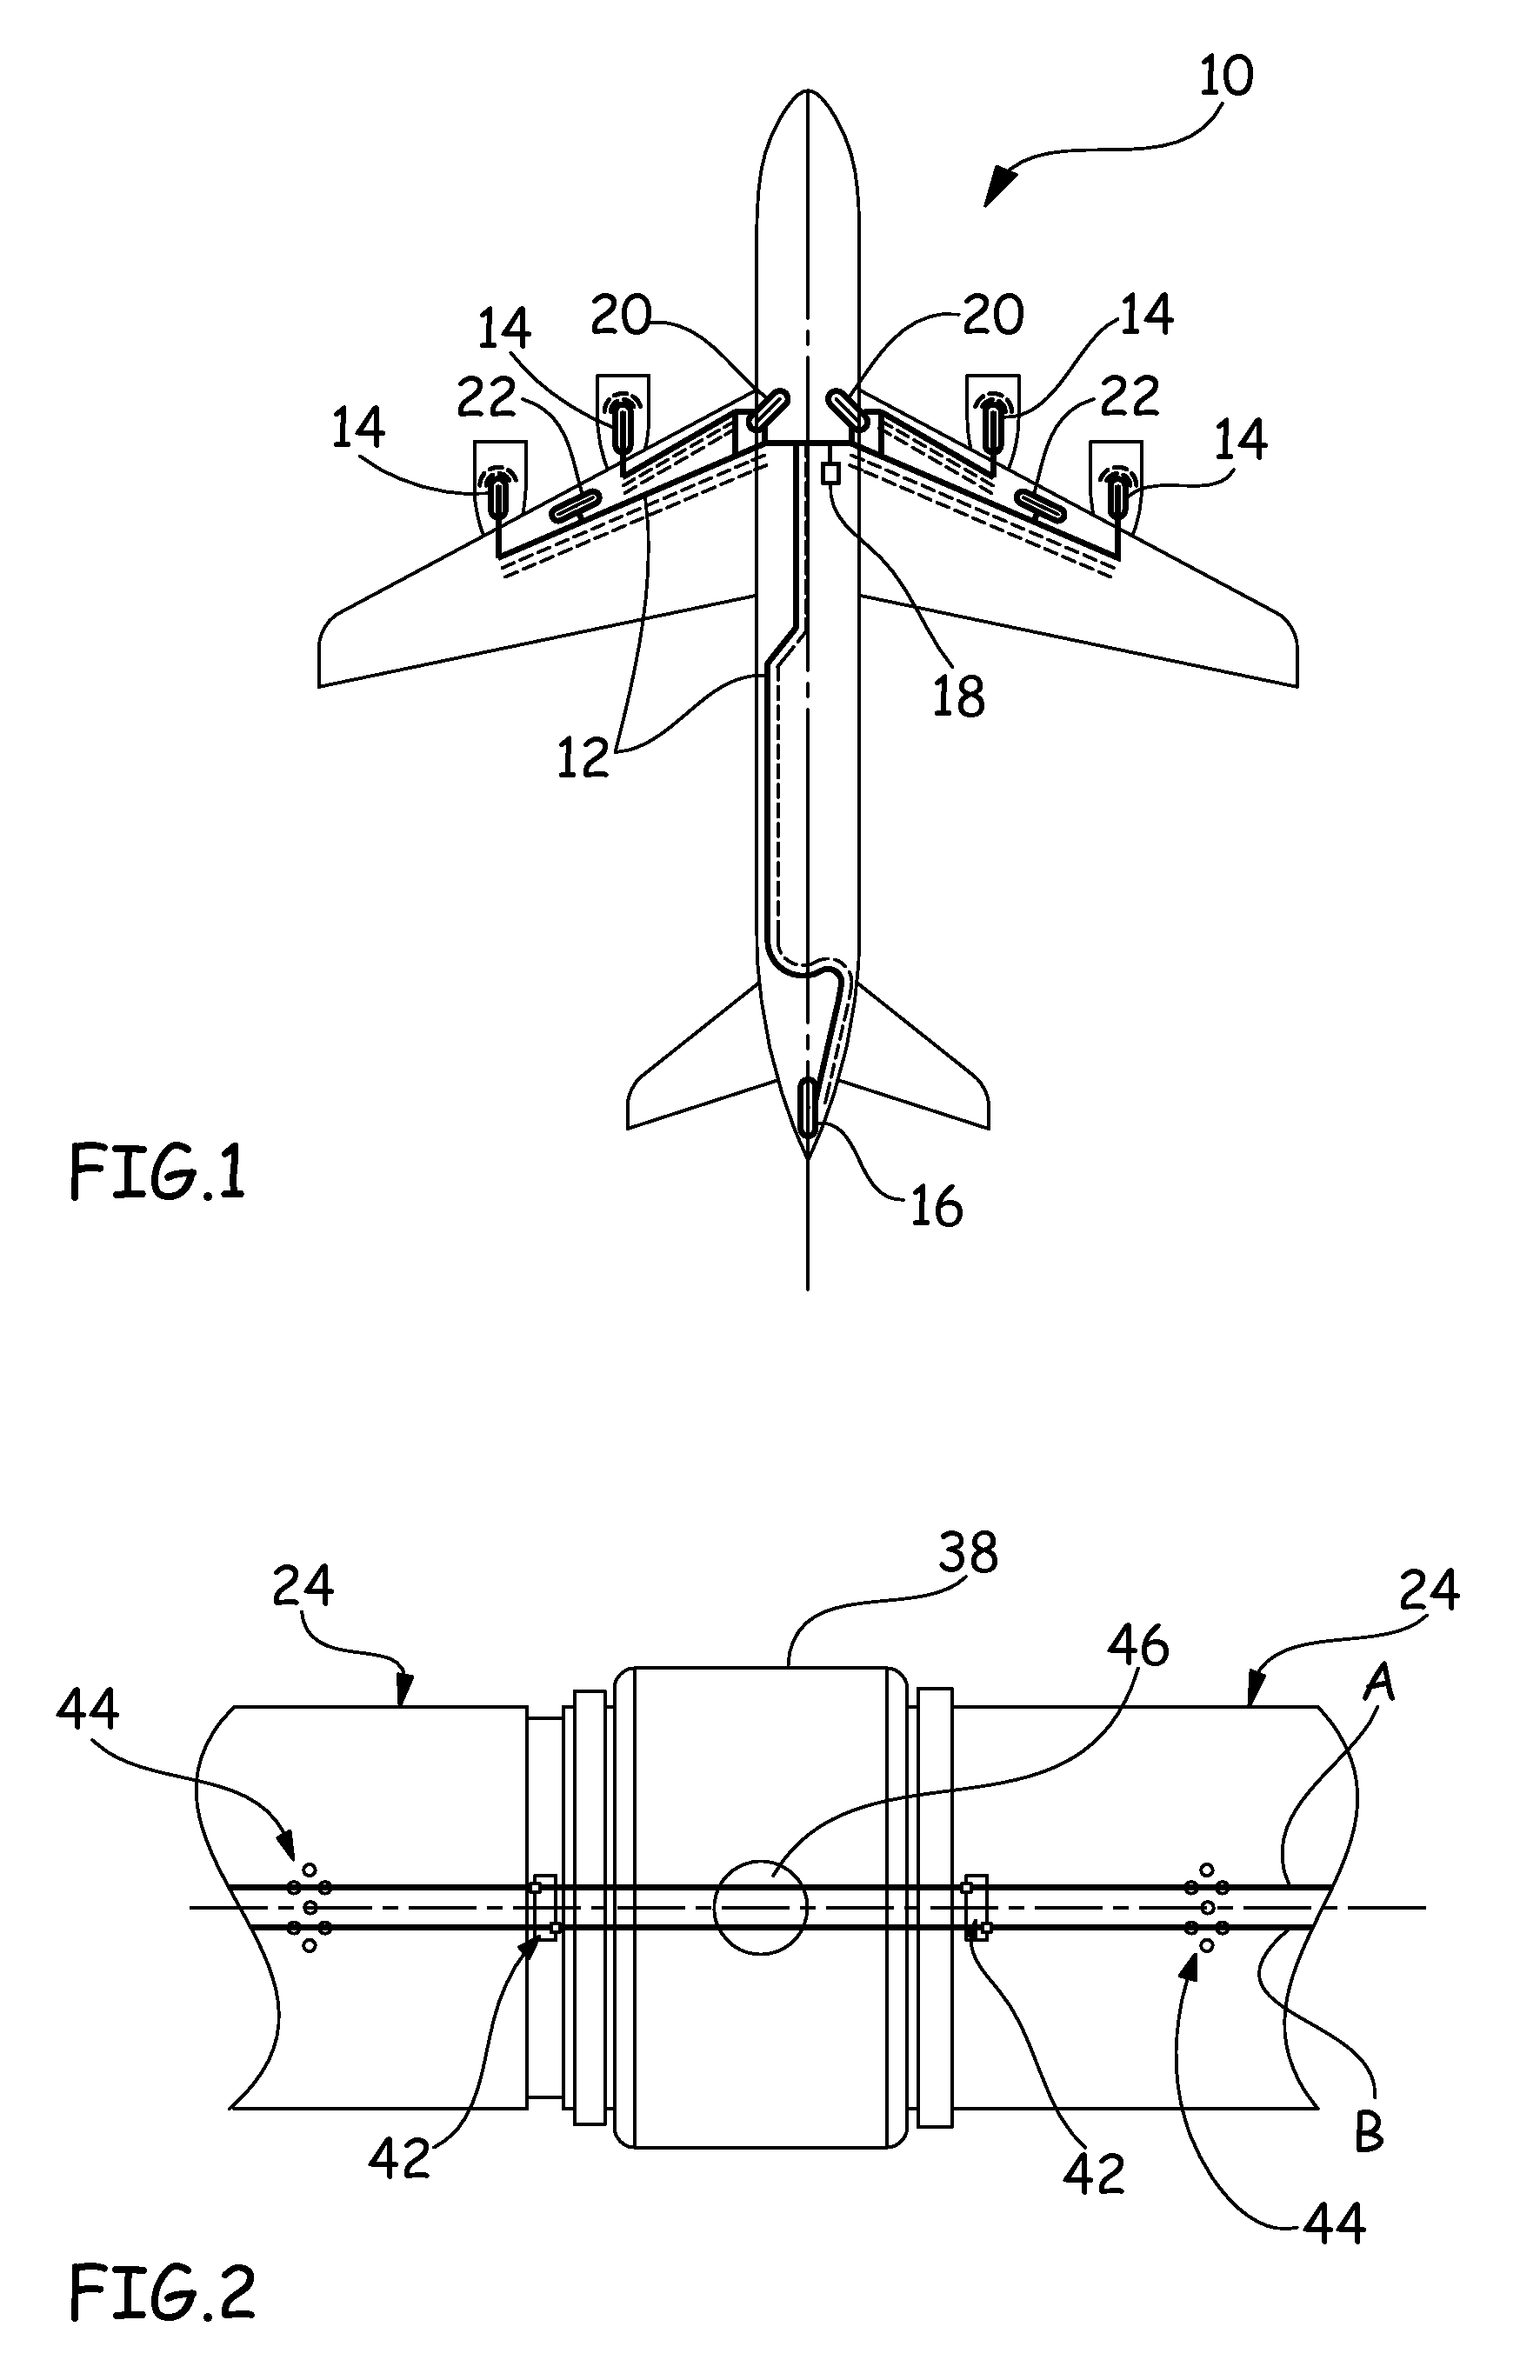 Pressurised hot air duct of an aircraft equipped with a device for detecting air leakage